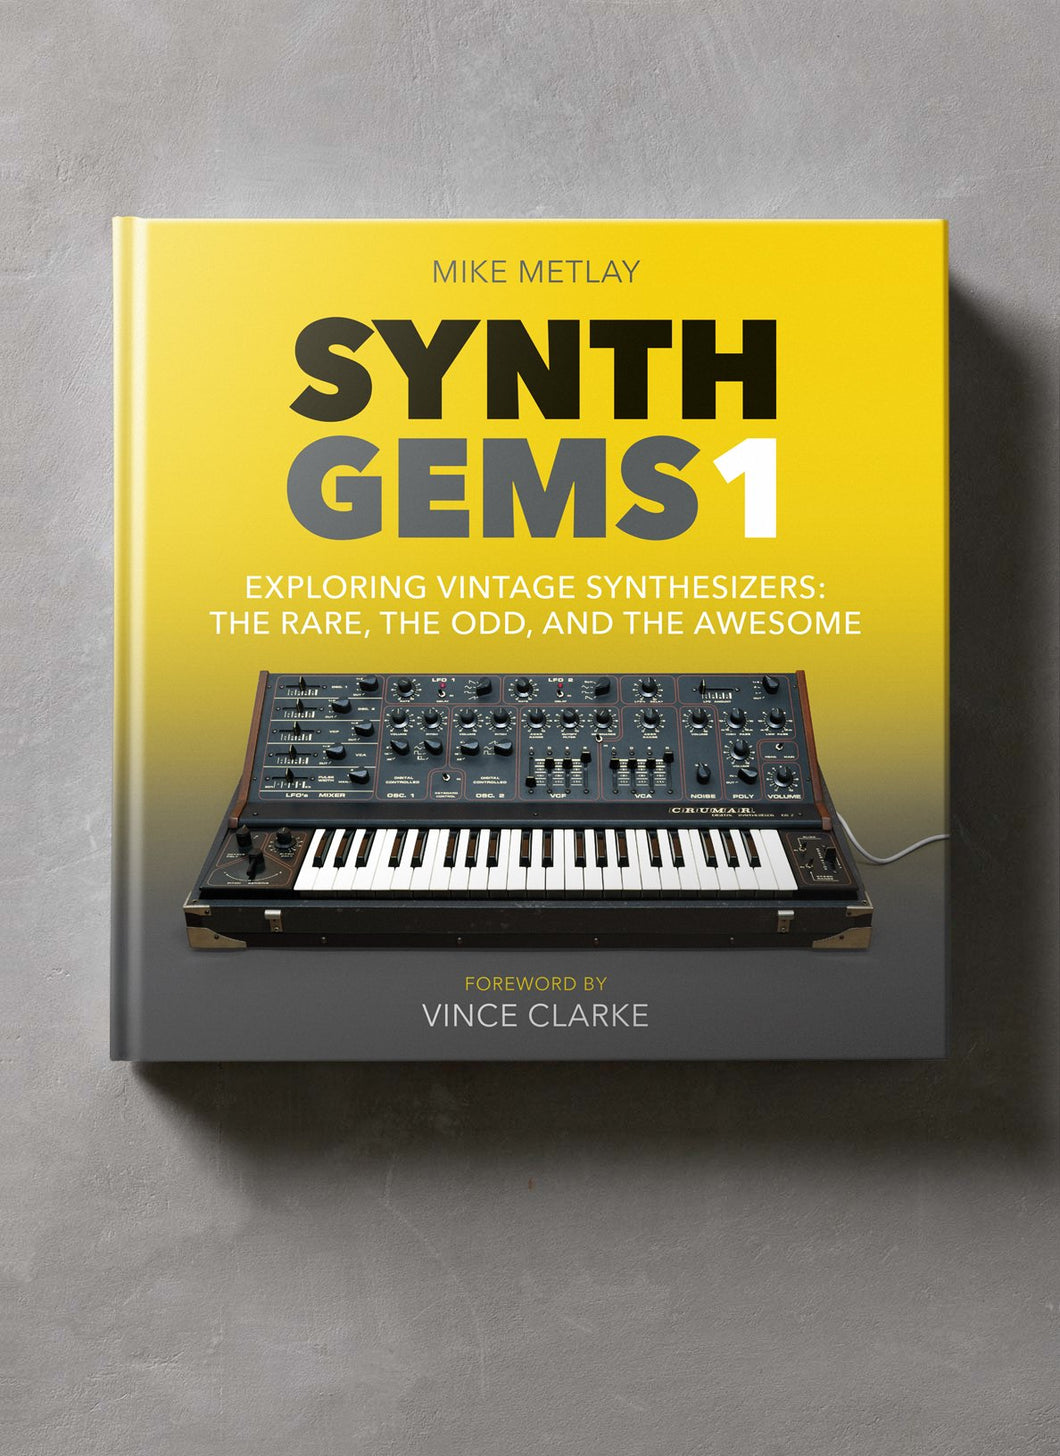 Metlay - SYNTH GEMS 1 - Exploring Vintage Synthesizers